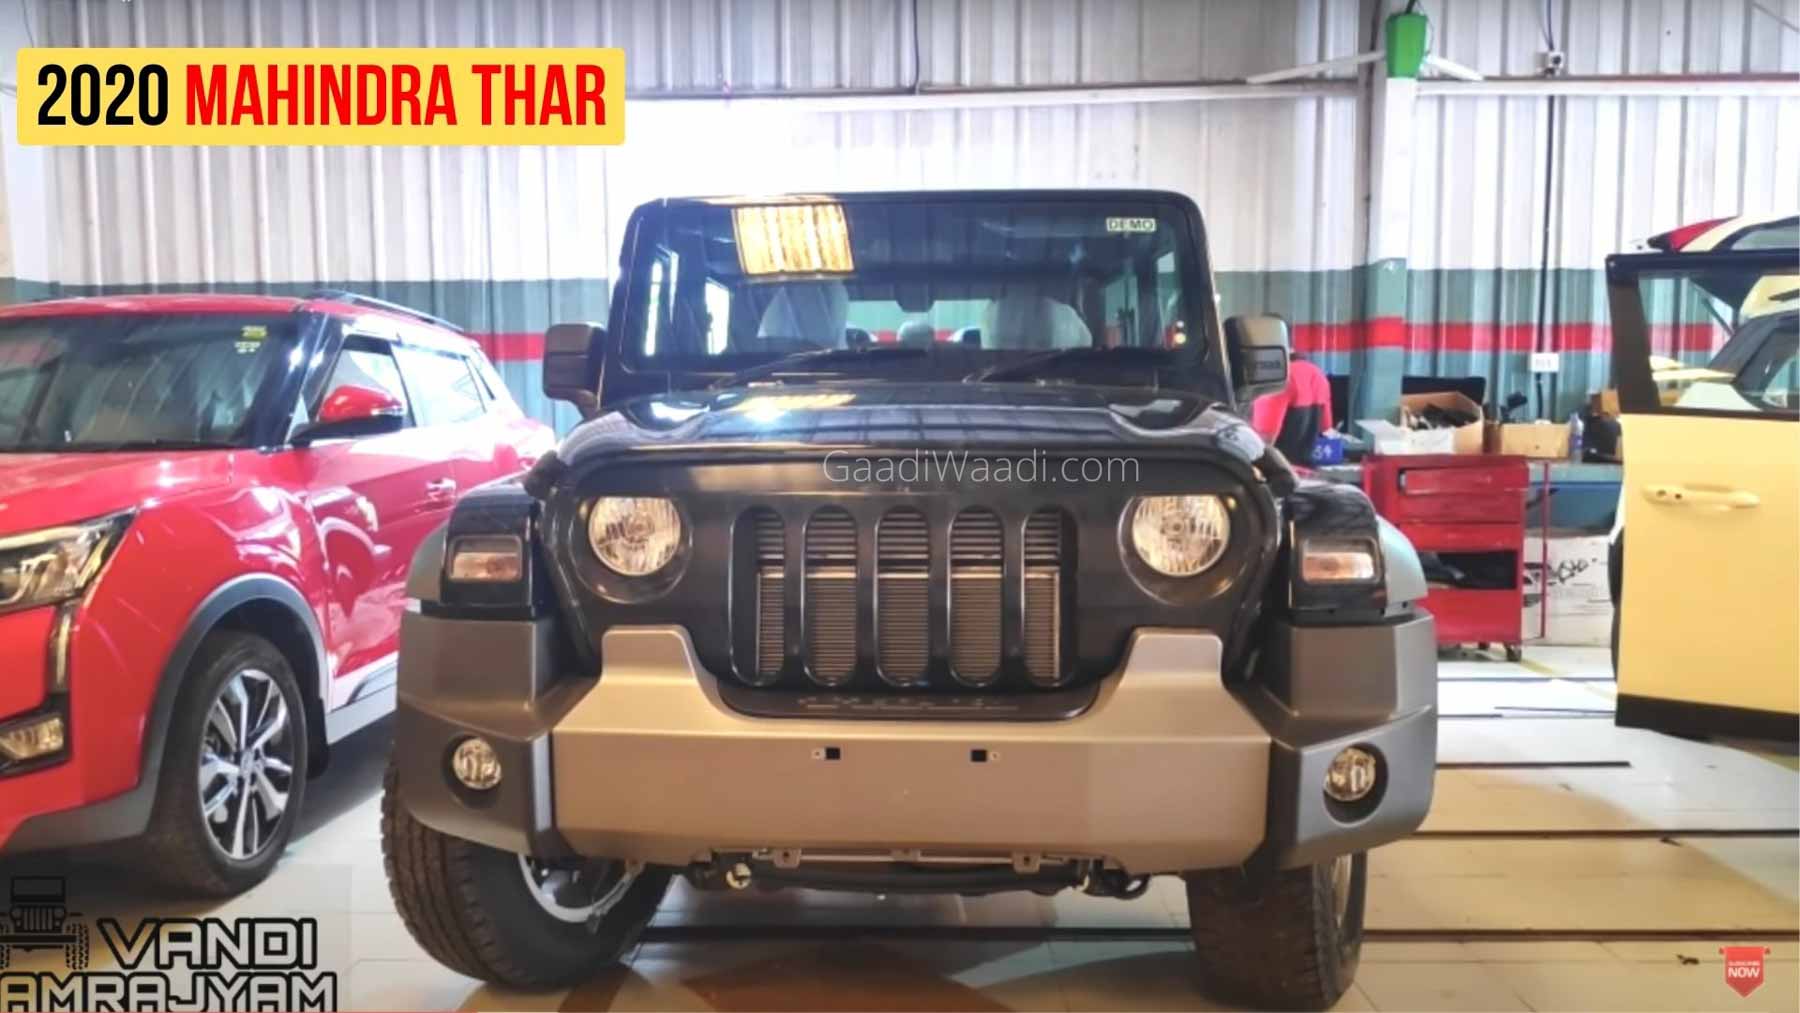 New 2020 Mahindra Thar Customised With Jeep Inspired Grille Video